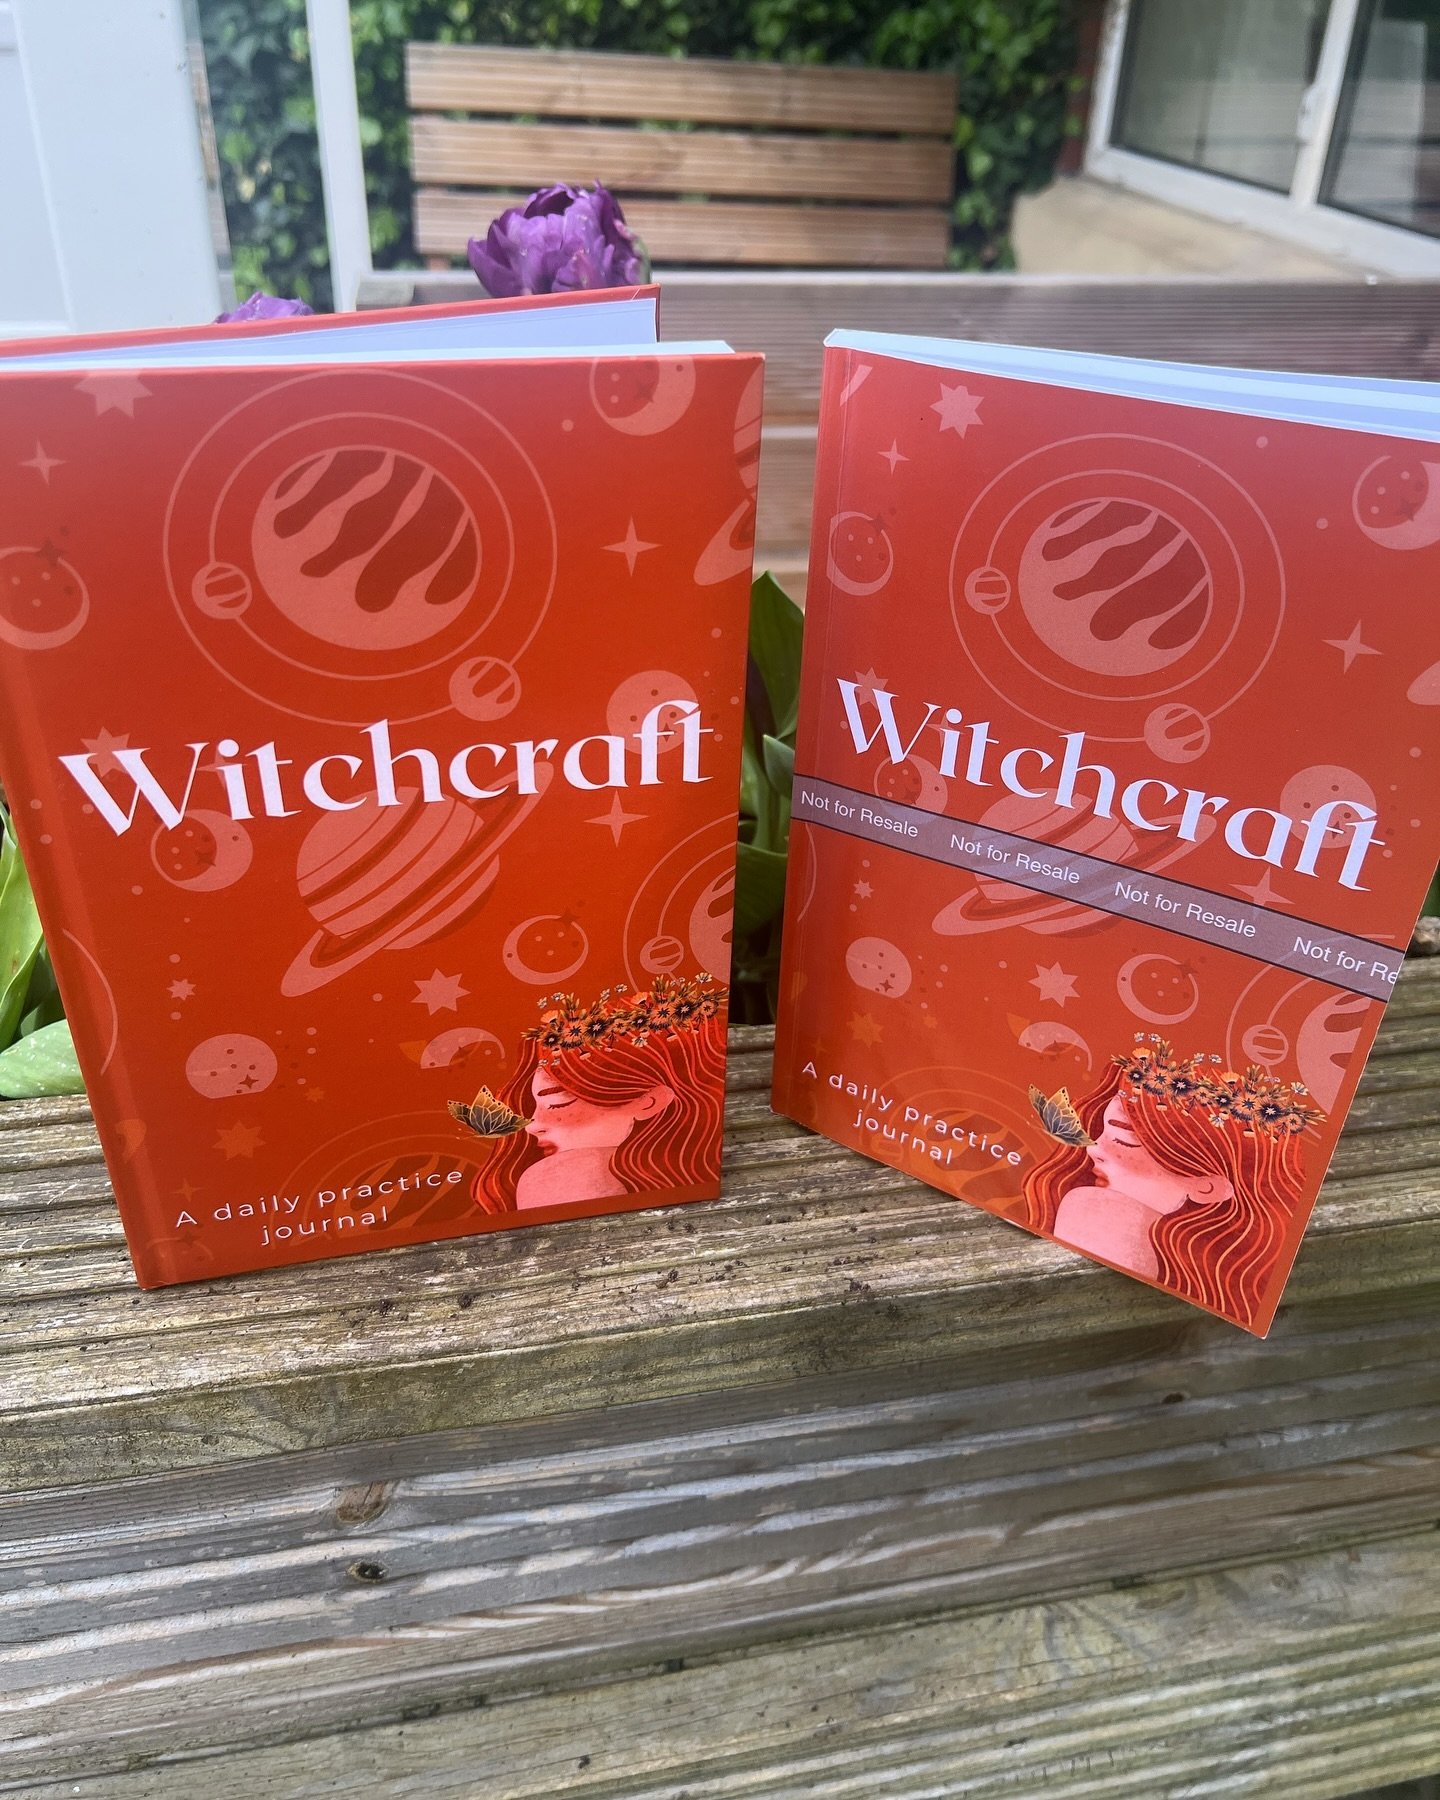 Which do you prefer, paperback or hardback?

Start your daily practice and connect with your craft on a higher level. 

Available on Amazon. Link in the bio.
#pagansofinstagram #witchcraft #wicca #spellcraft #tarotreading #oraclereading #paganprayer